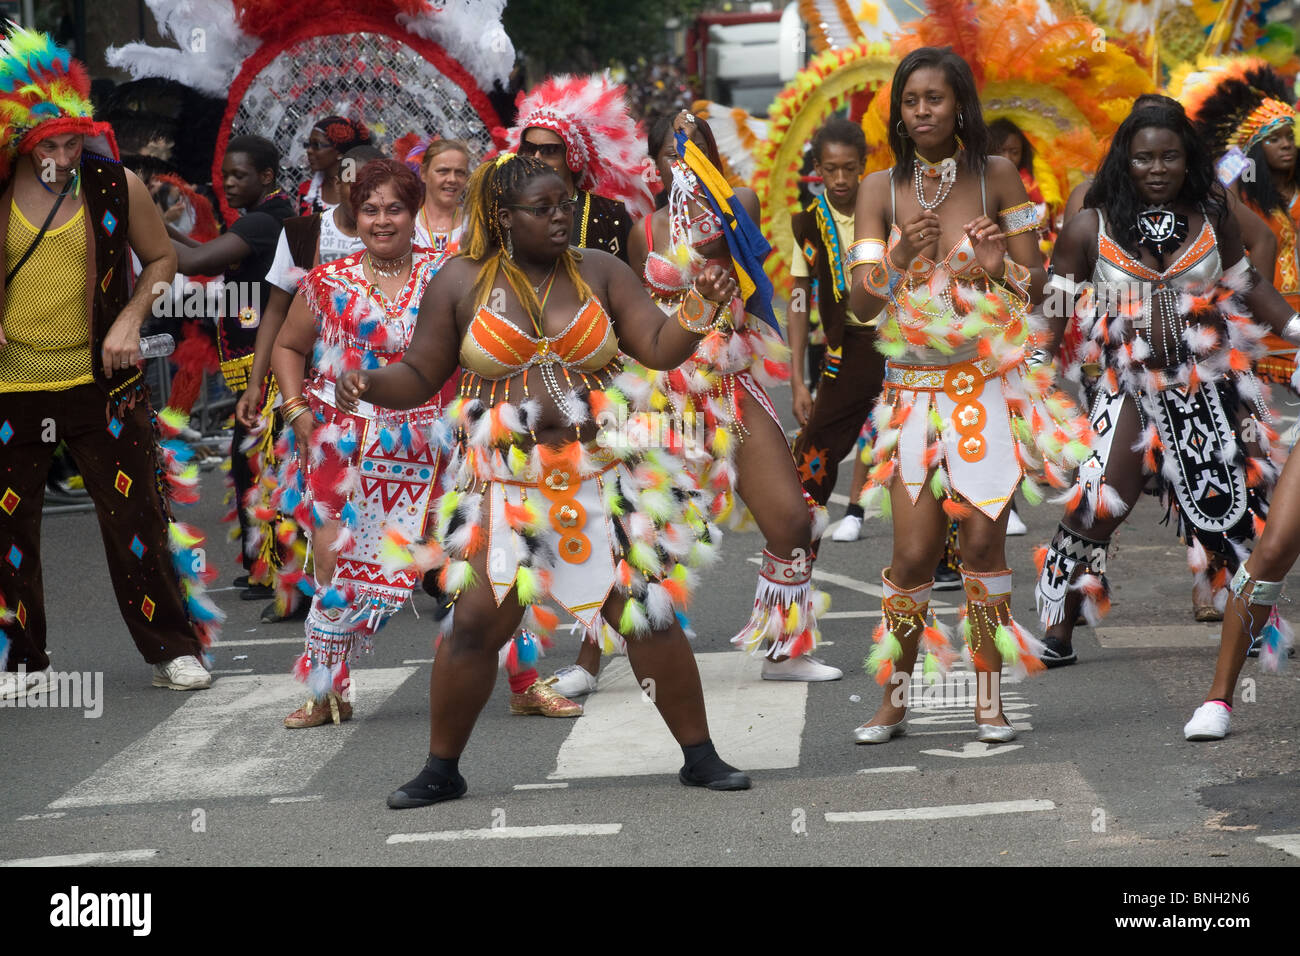 Dancers wearing colourful costume at Notting Hill Carnival, London Stock Photo